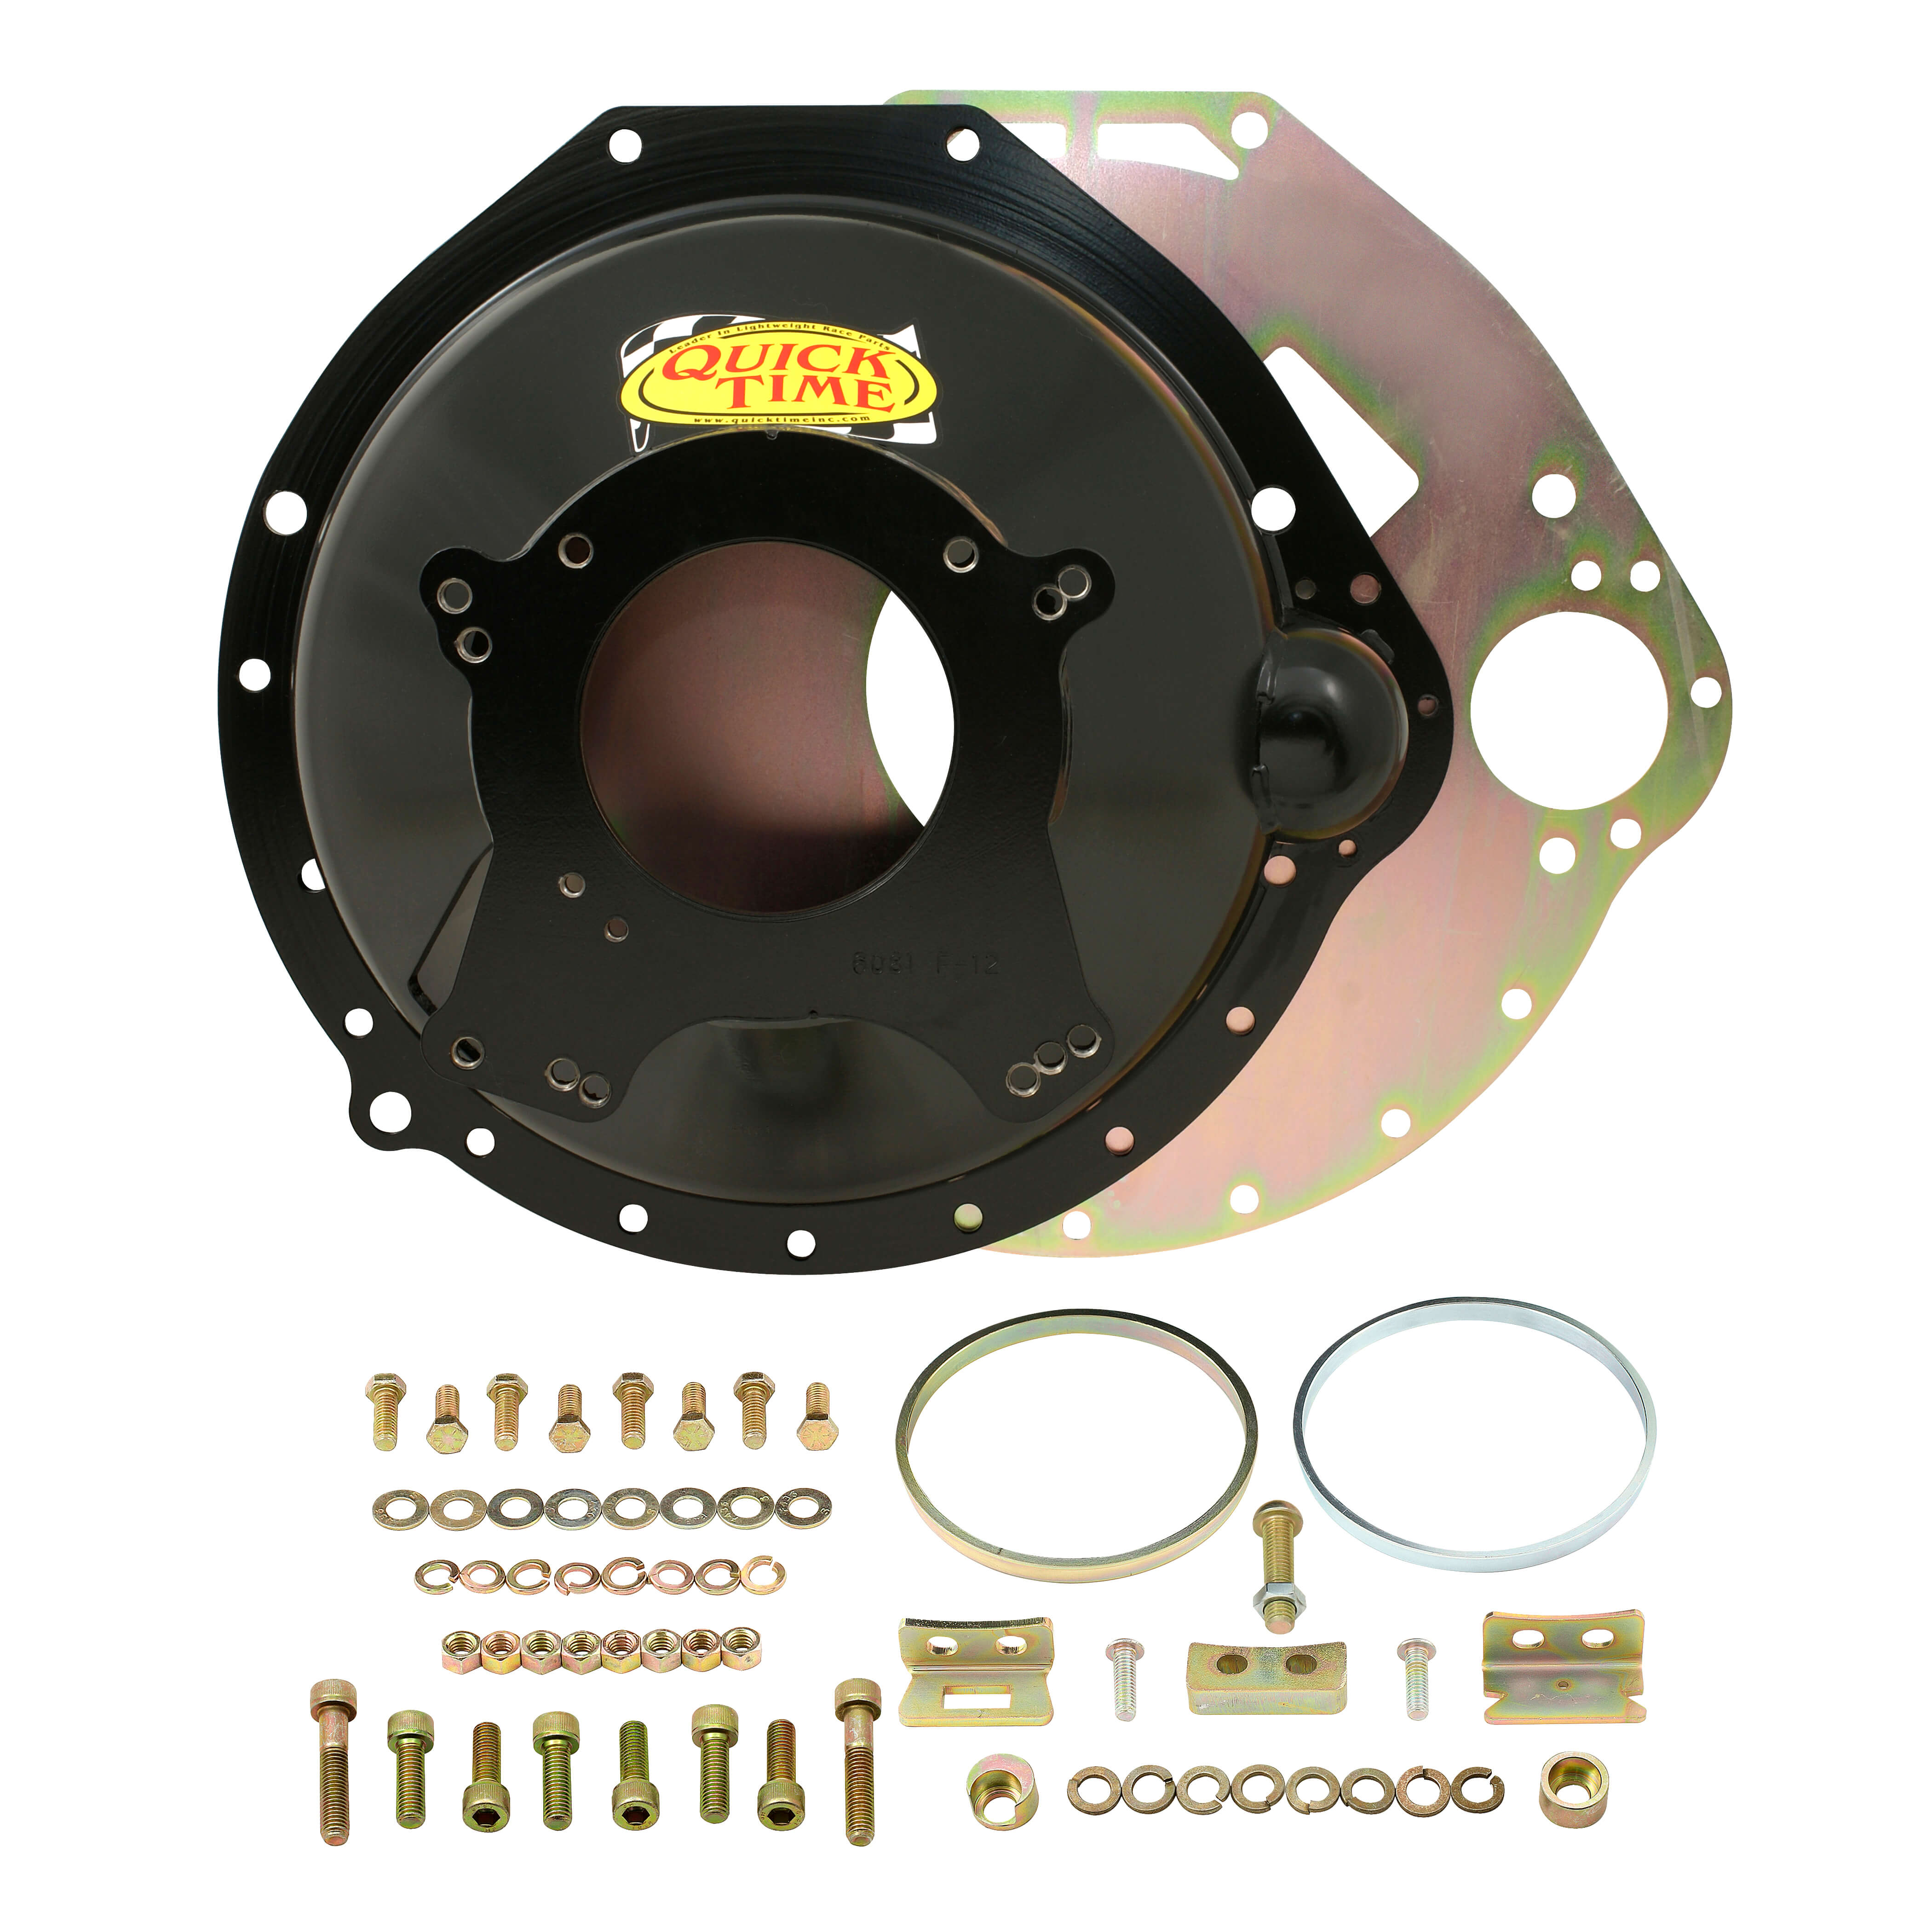 Quick Time SFI Bellhousing Ford Modular 4.6, 5.0, 5.4 and More to Ford TKX/TKO/TR3550